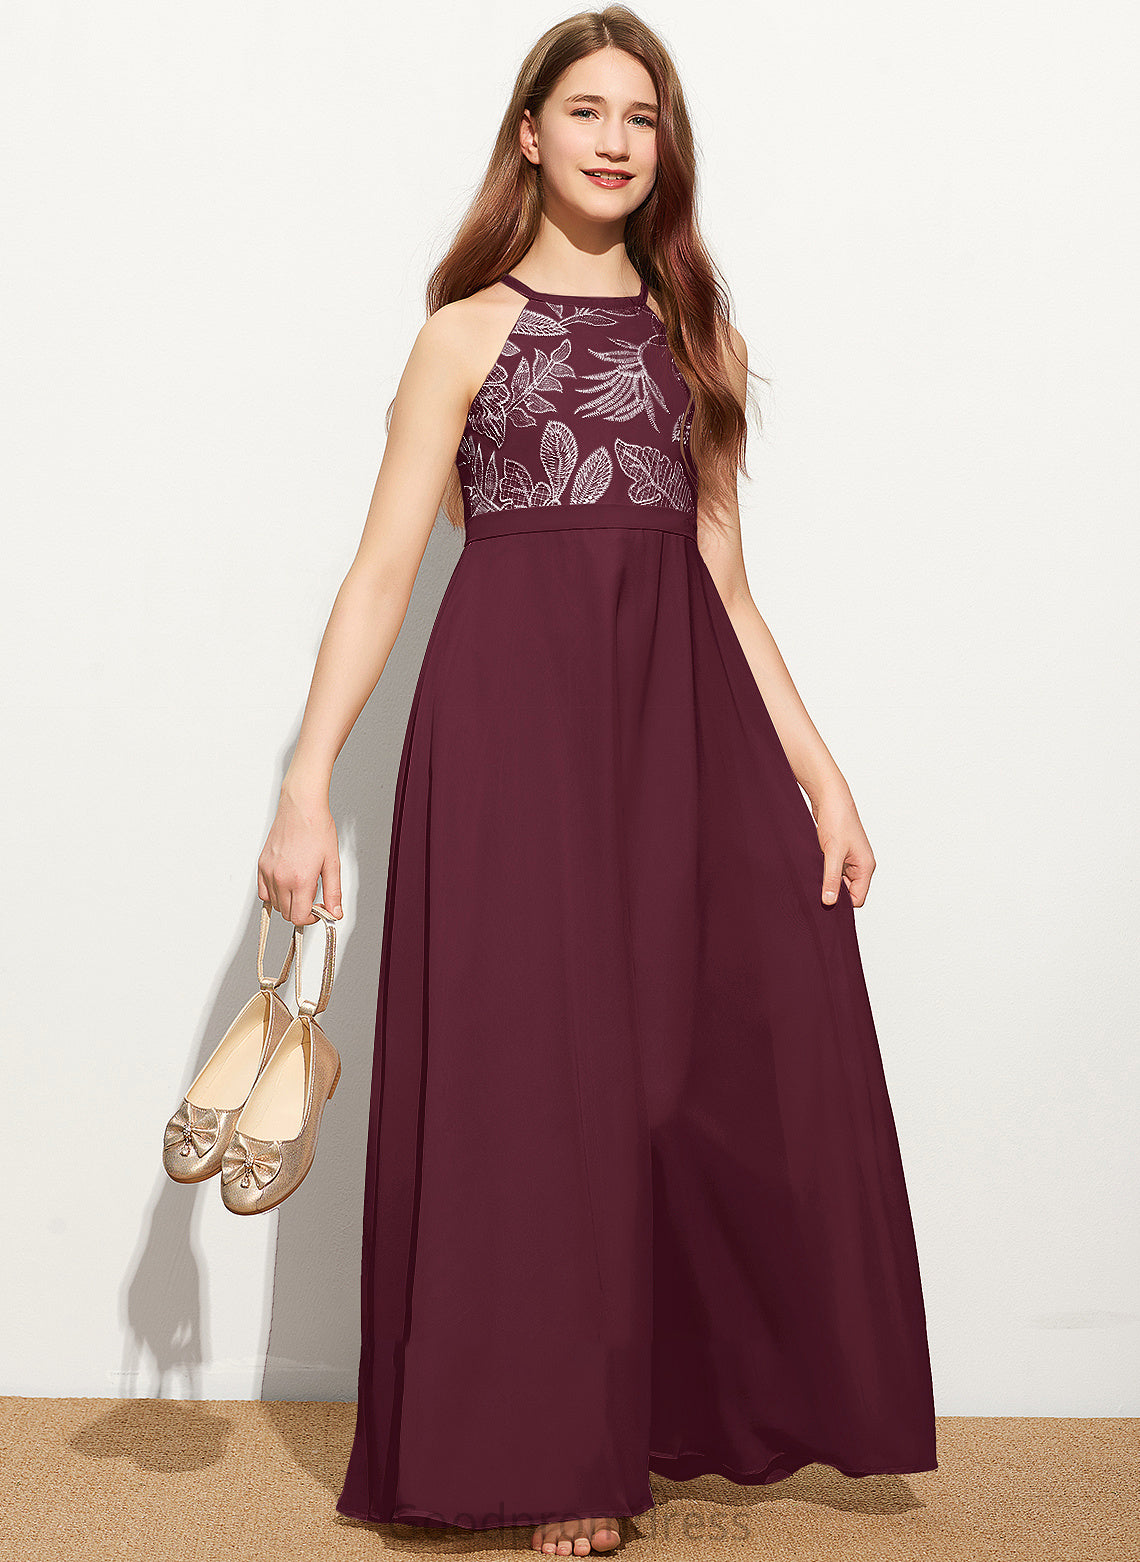 With Chiffon Lace Junior Bridesmaid Dresses A-Line Bow(s) Maeve Floor-Length Neck Scoop